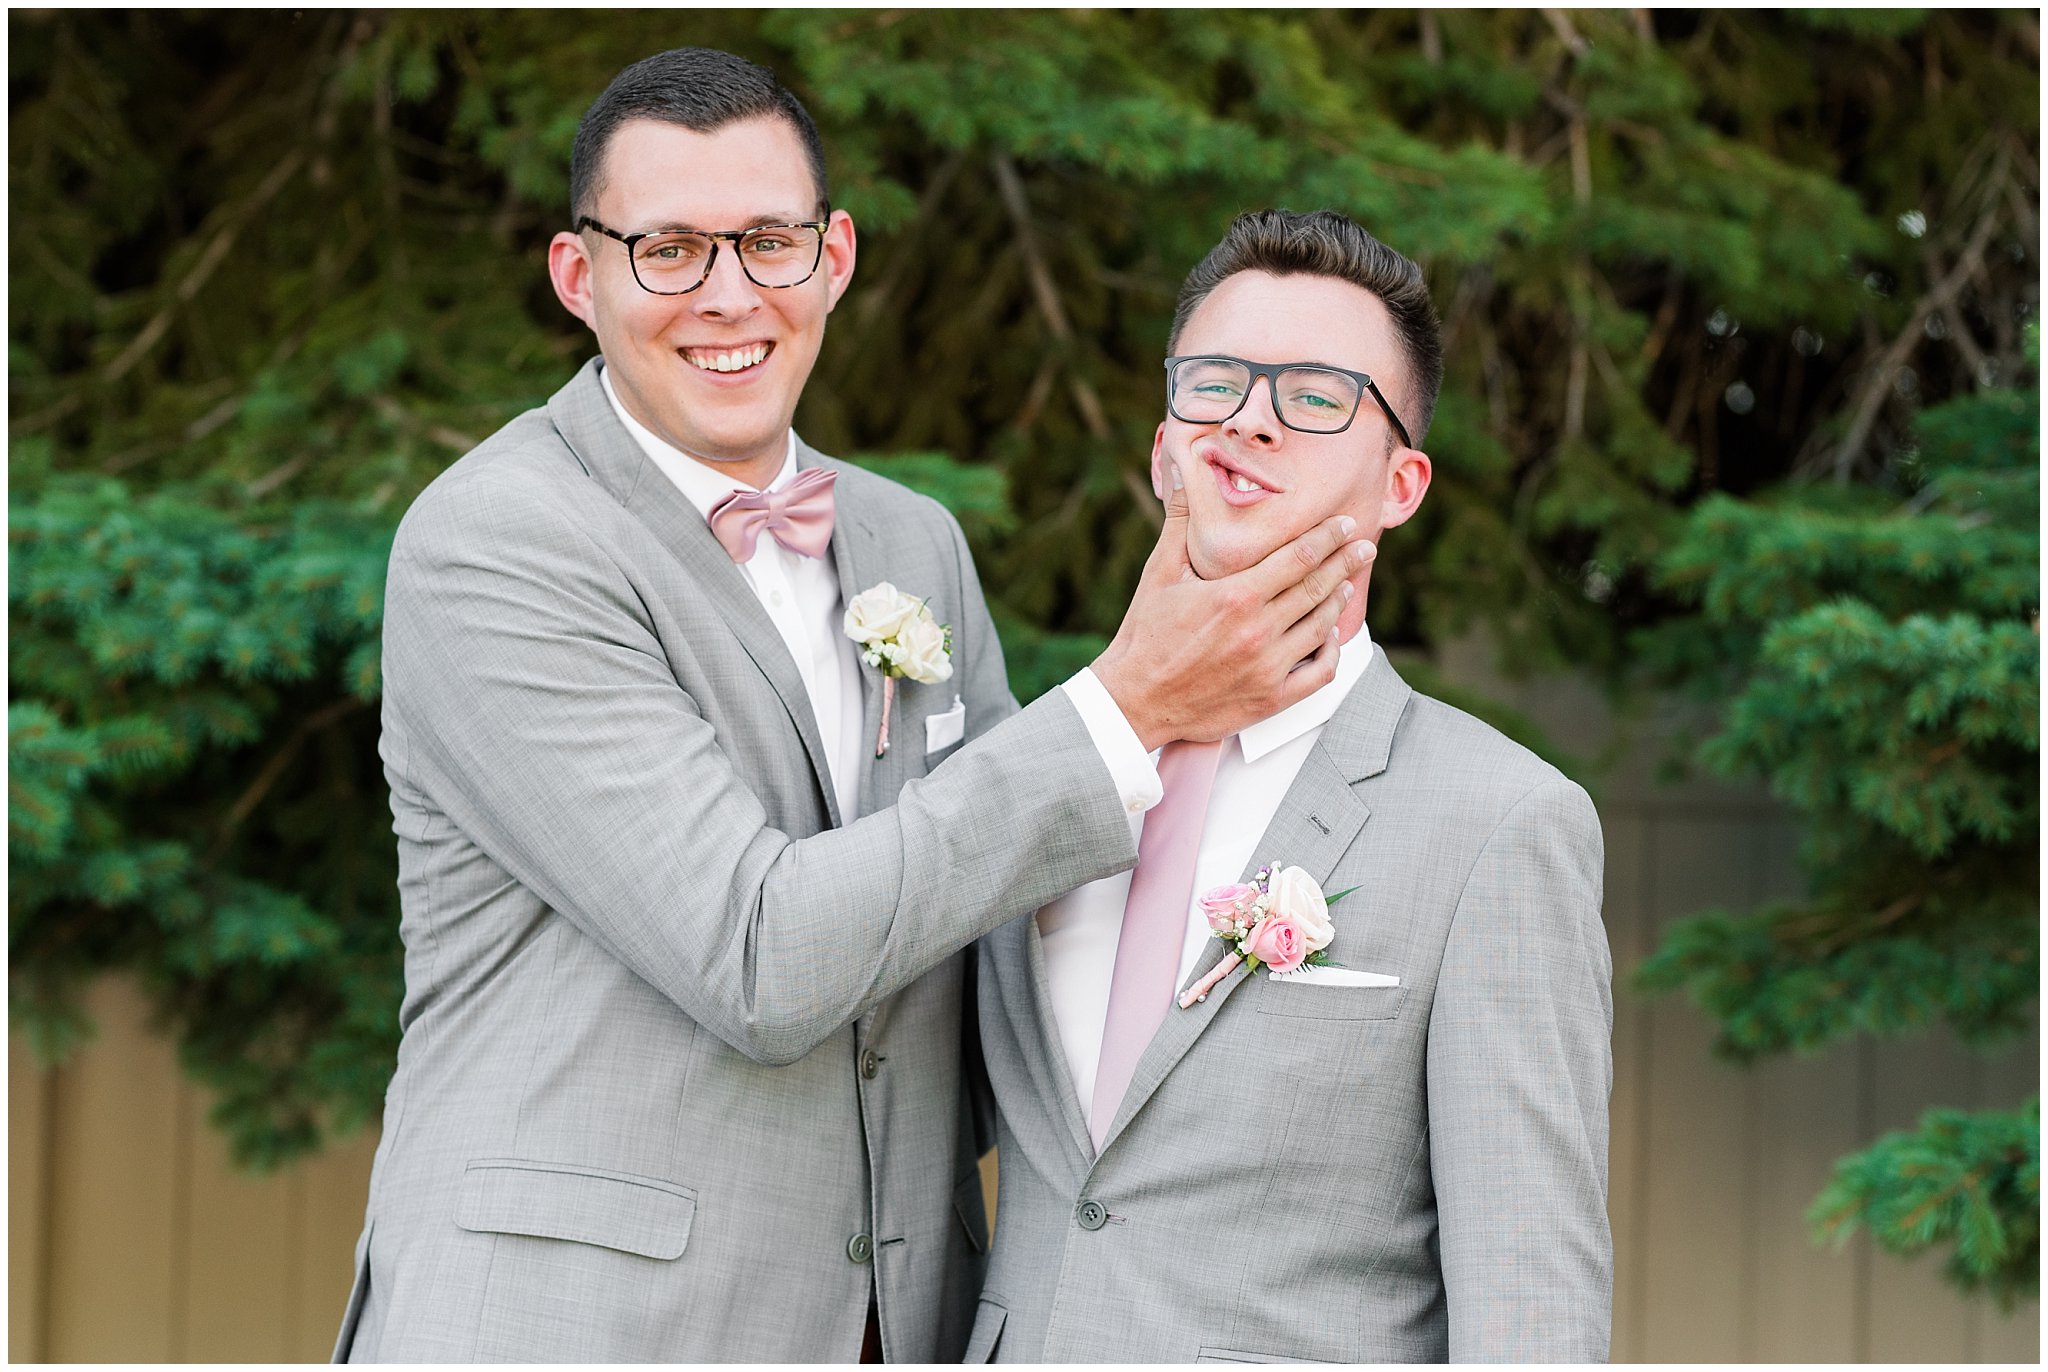 Groom and brother being goofy | Oak Hills Utah Dusty Rose and Gray Summer Wedding | Jessie and Dallin Photography